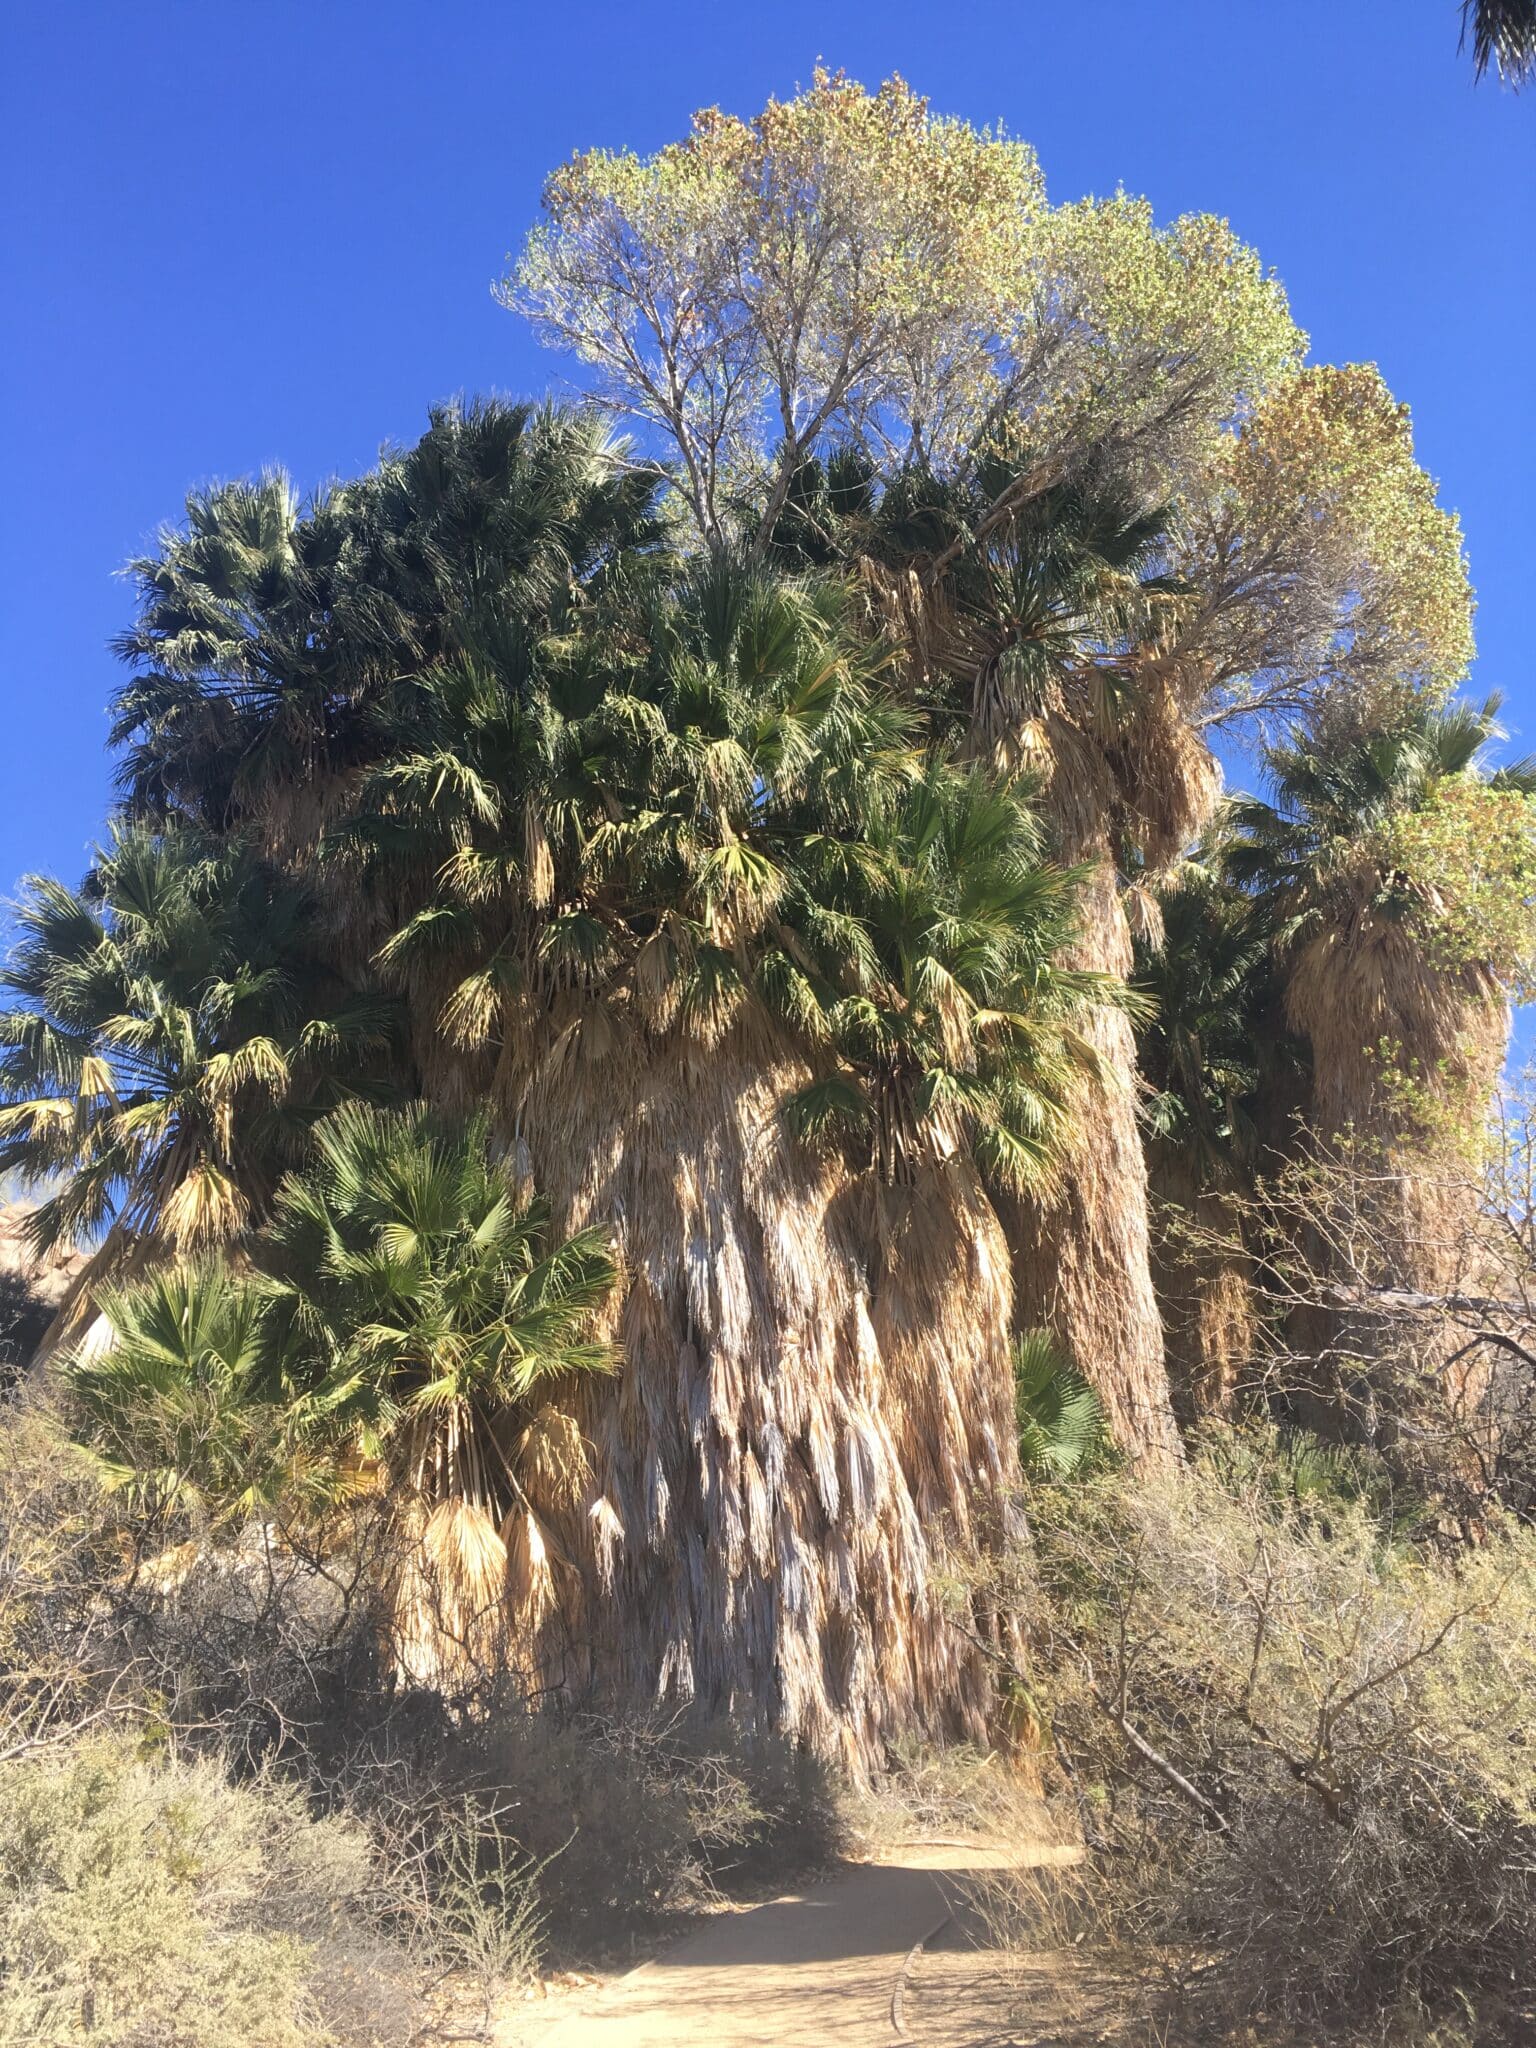 The Palm Oasis Trail at the Cottonwood Springs Visitor Center in Joshua Tree National Park